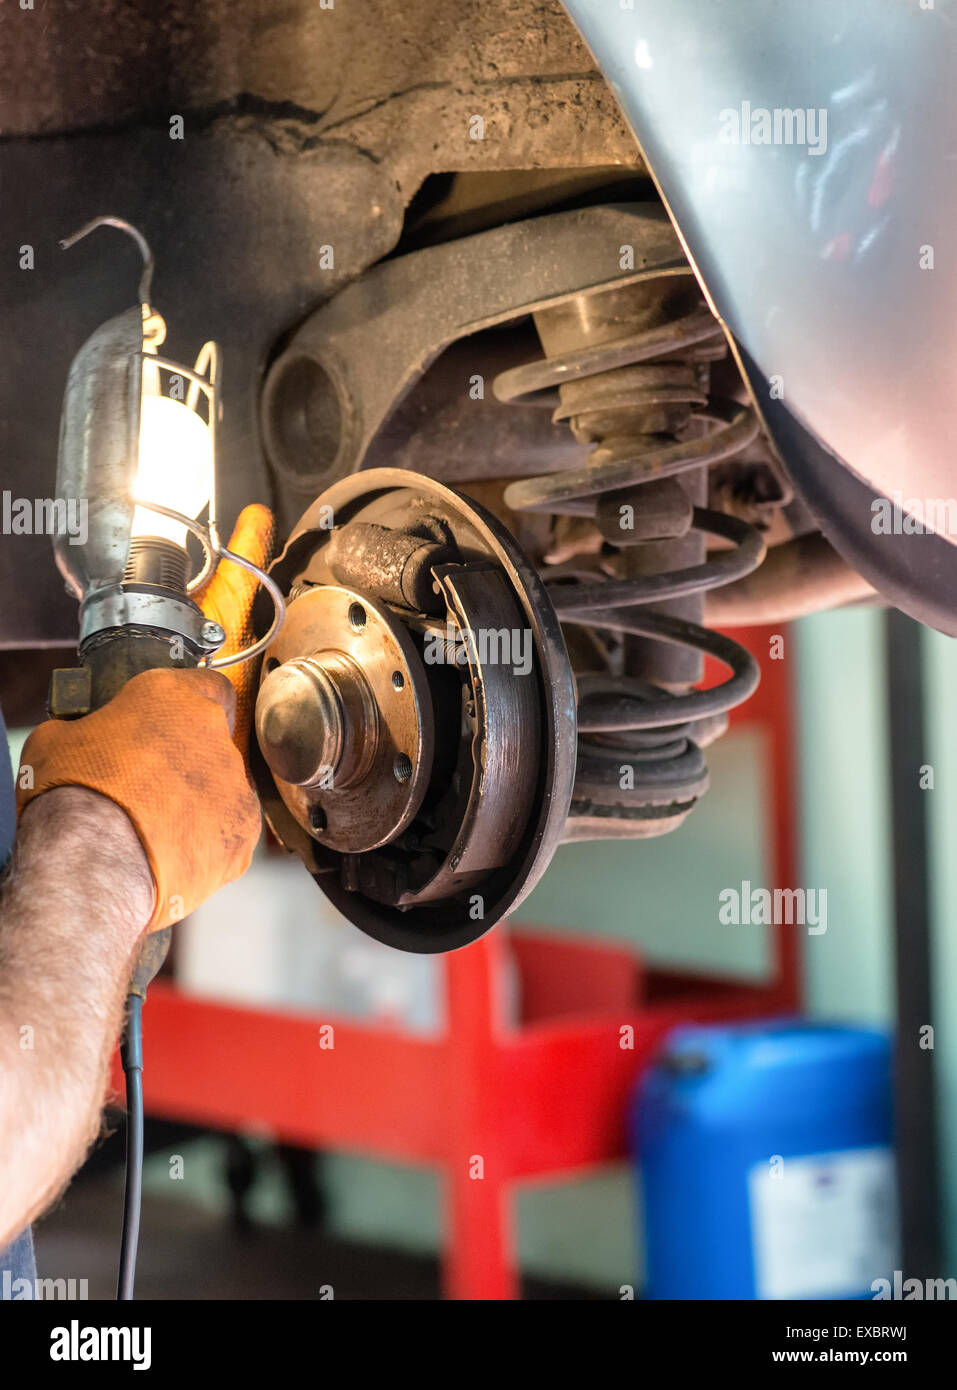 Mechanic working on car brakes with a torch Stock Photo